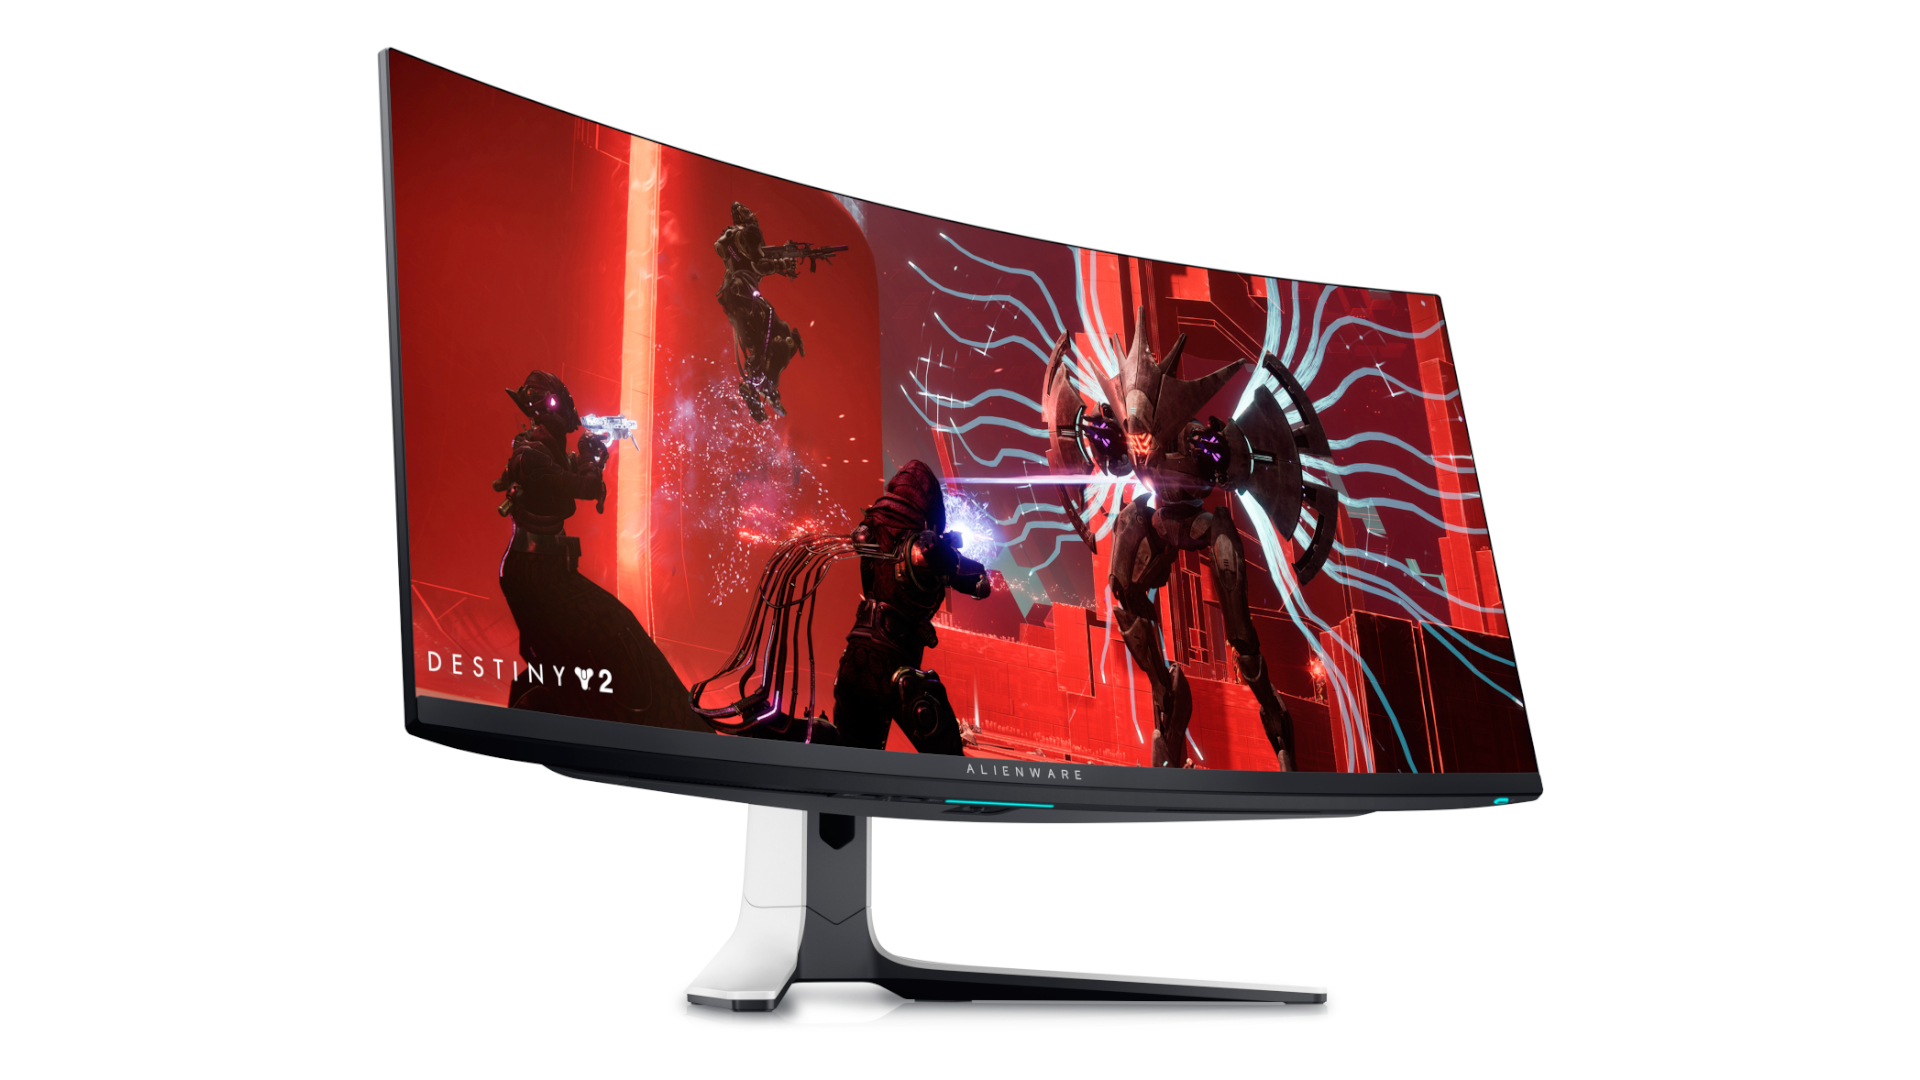 The best HDR monitor is the Alienware AW3423DW